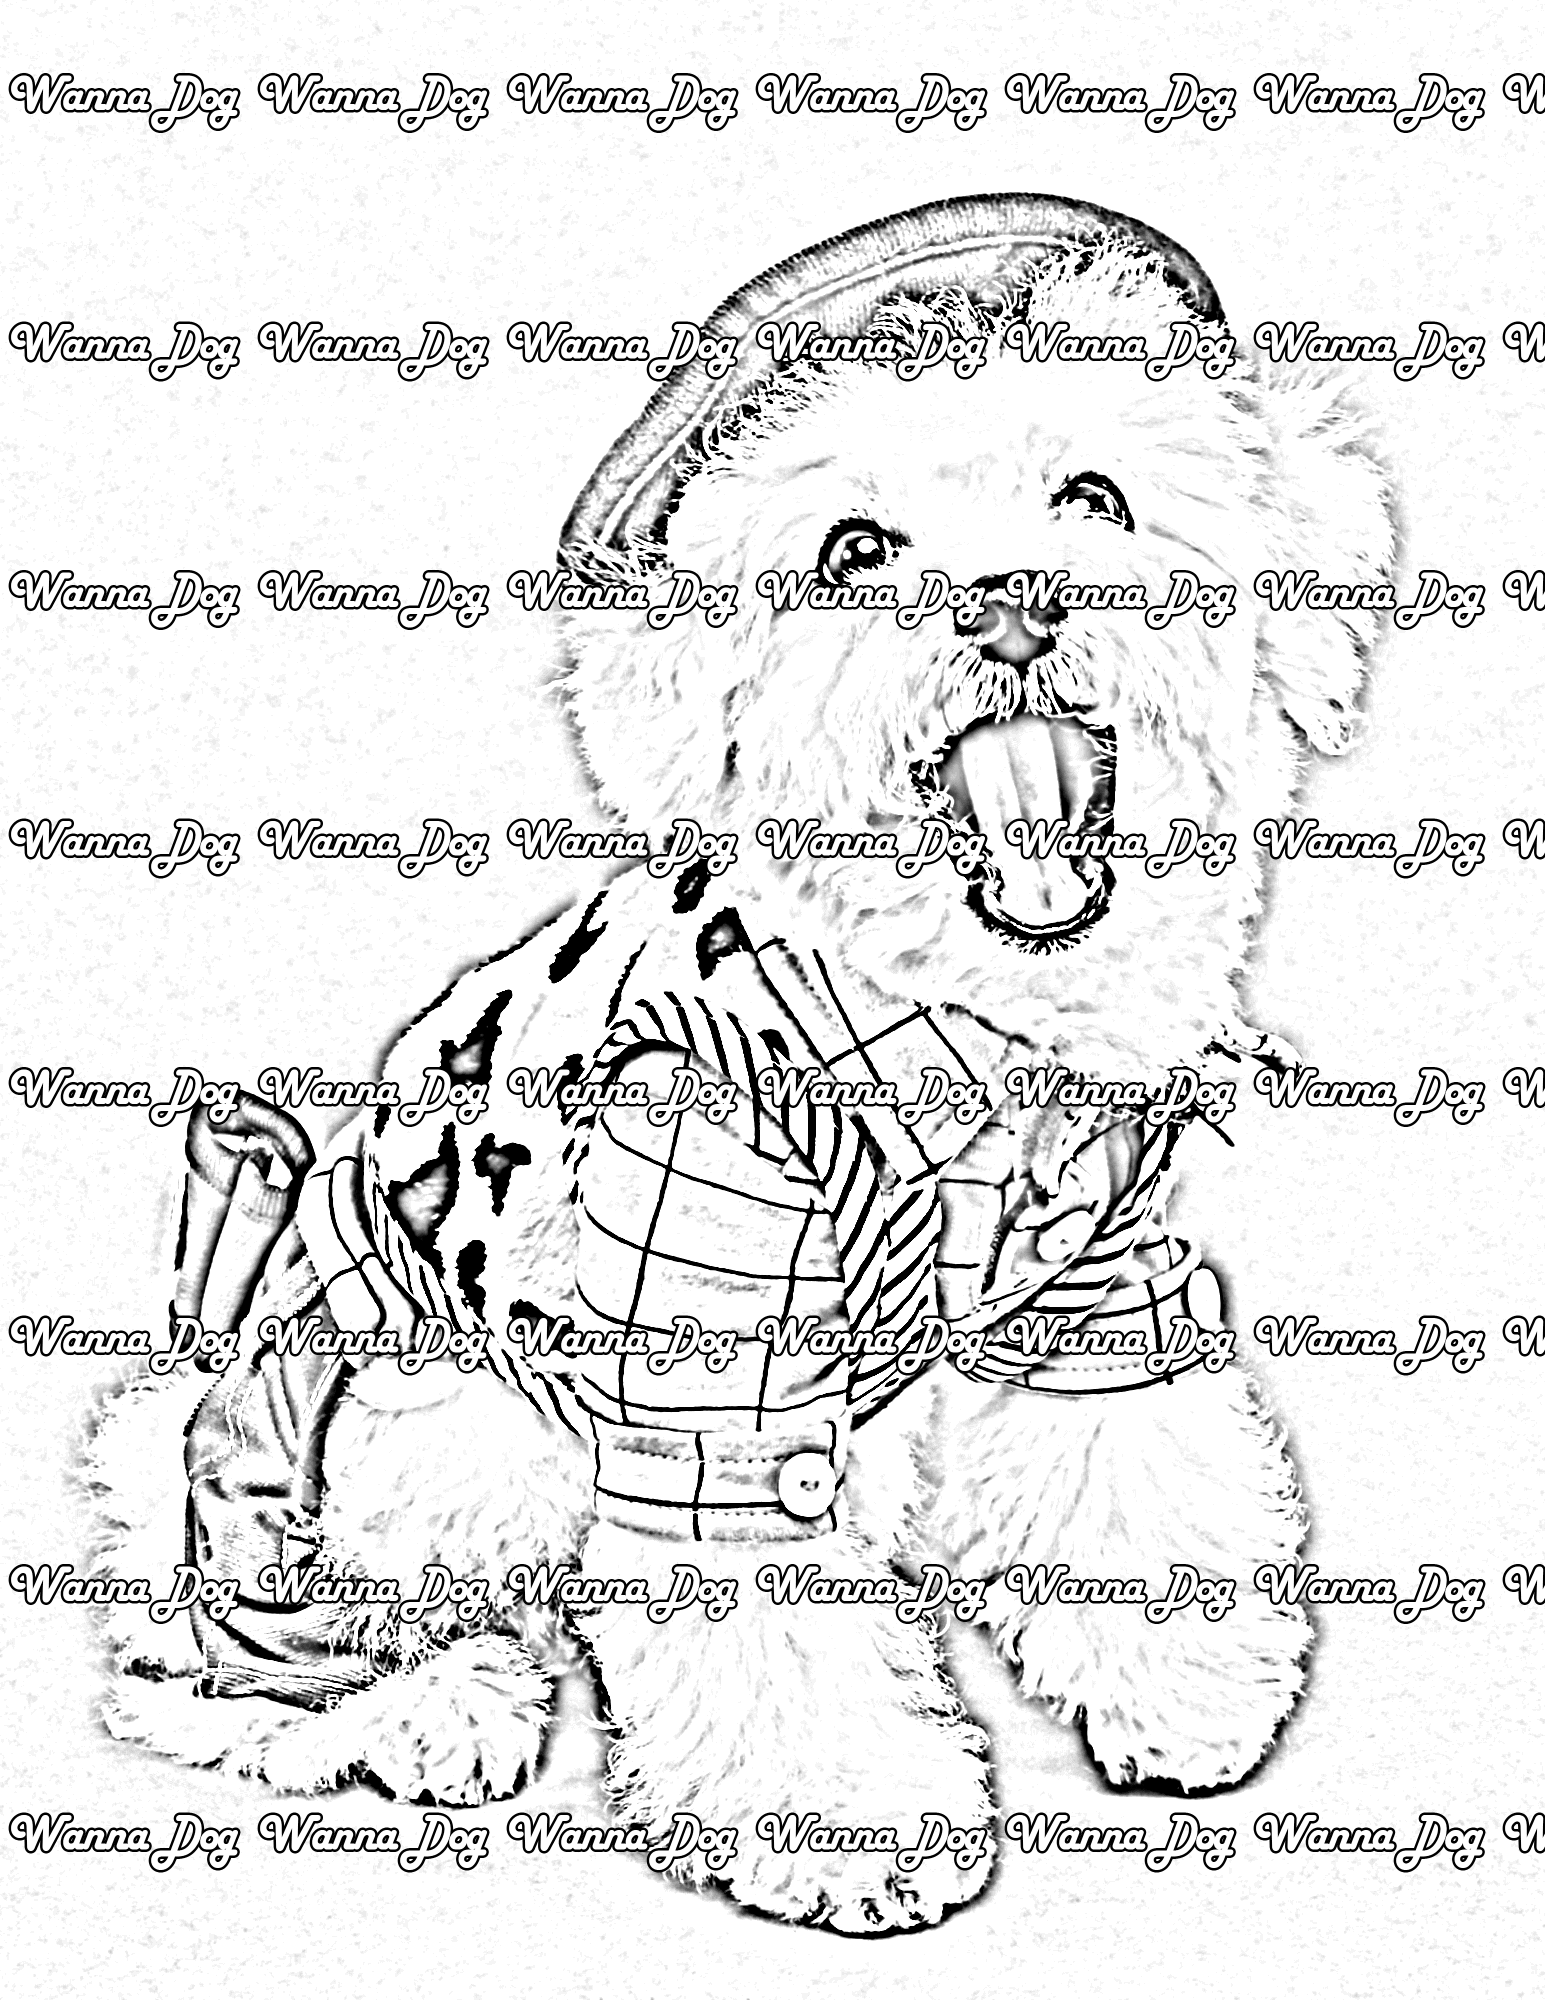 Halloween Puppy Coloring Page of a puppy dressed as Woody from Toy Story